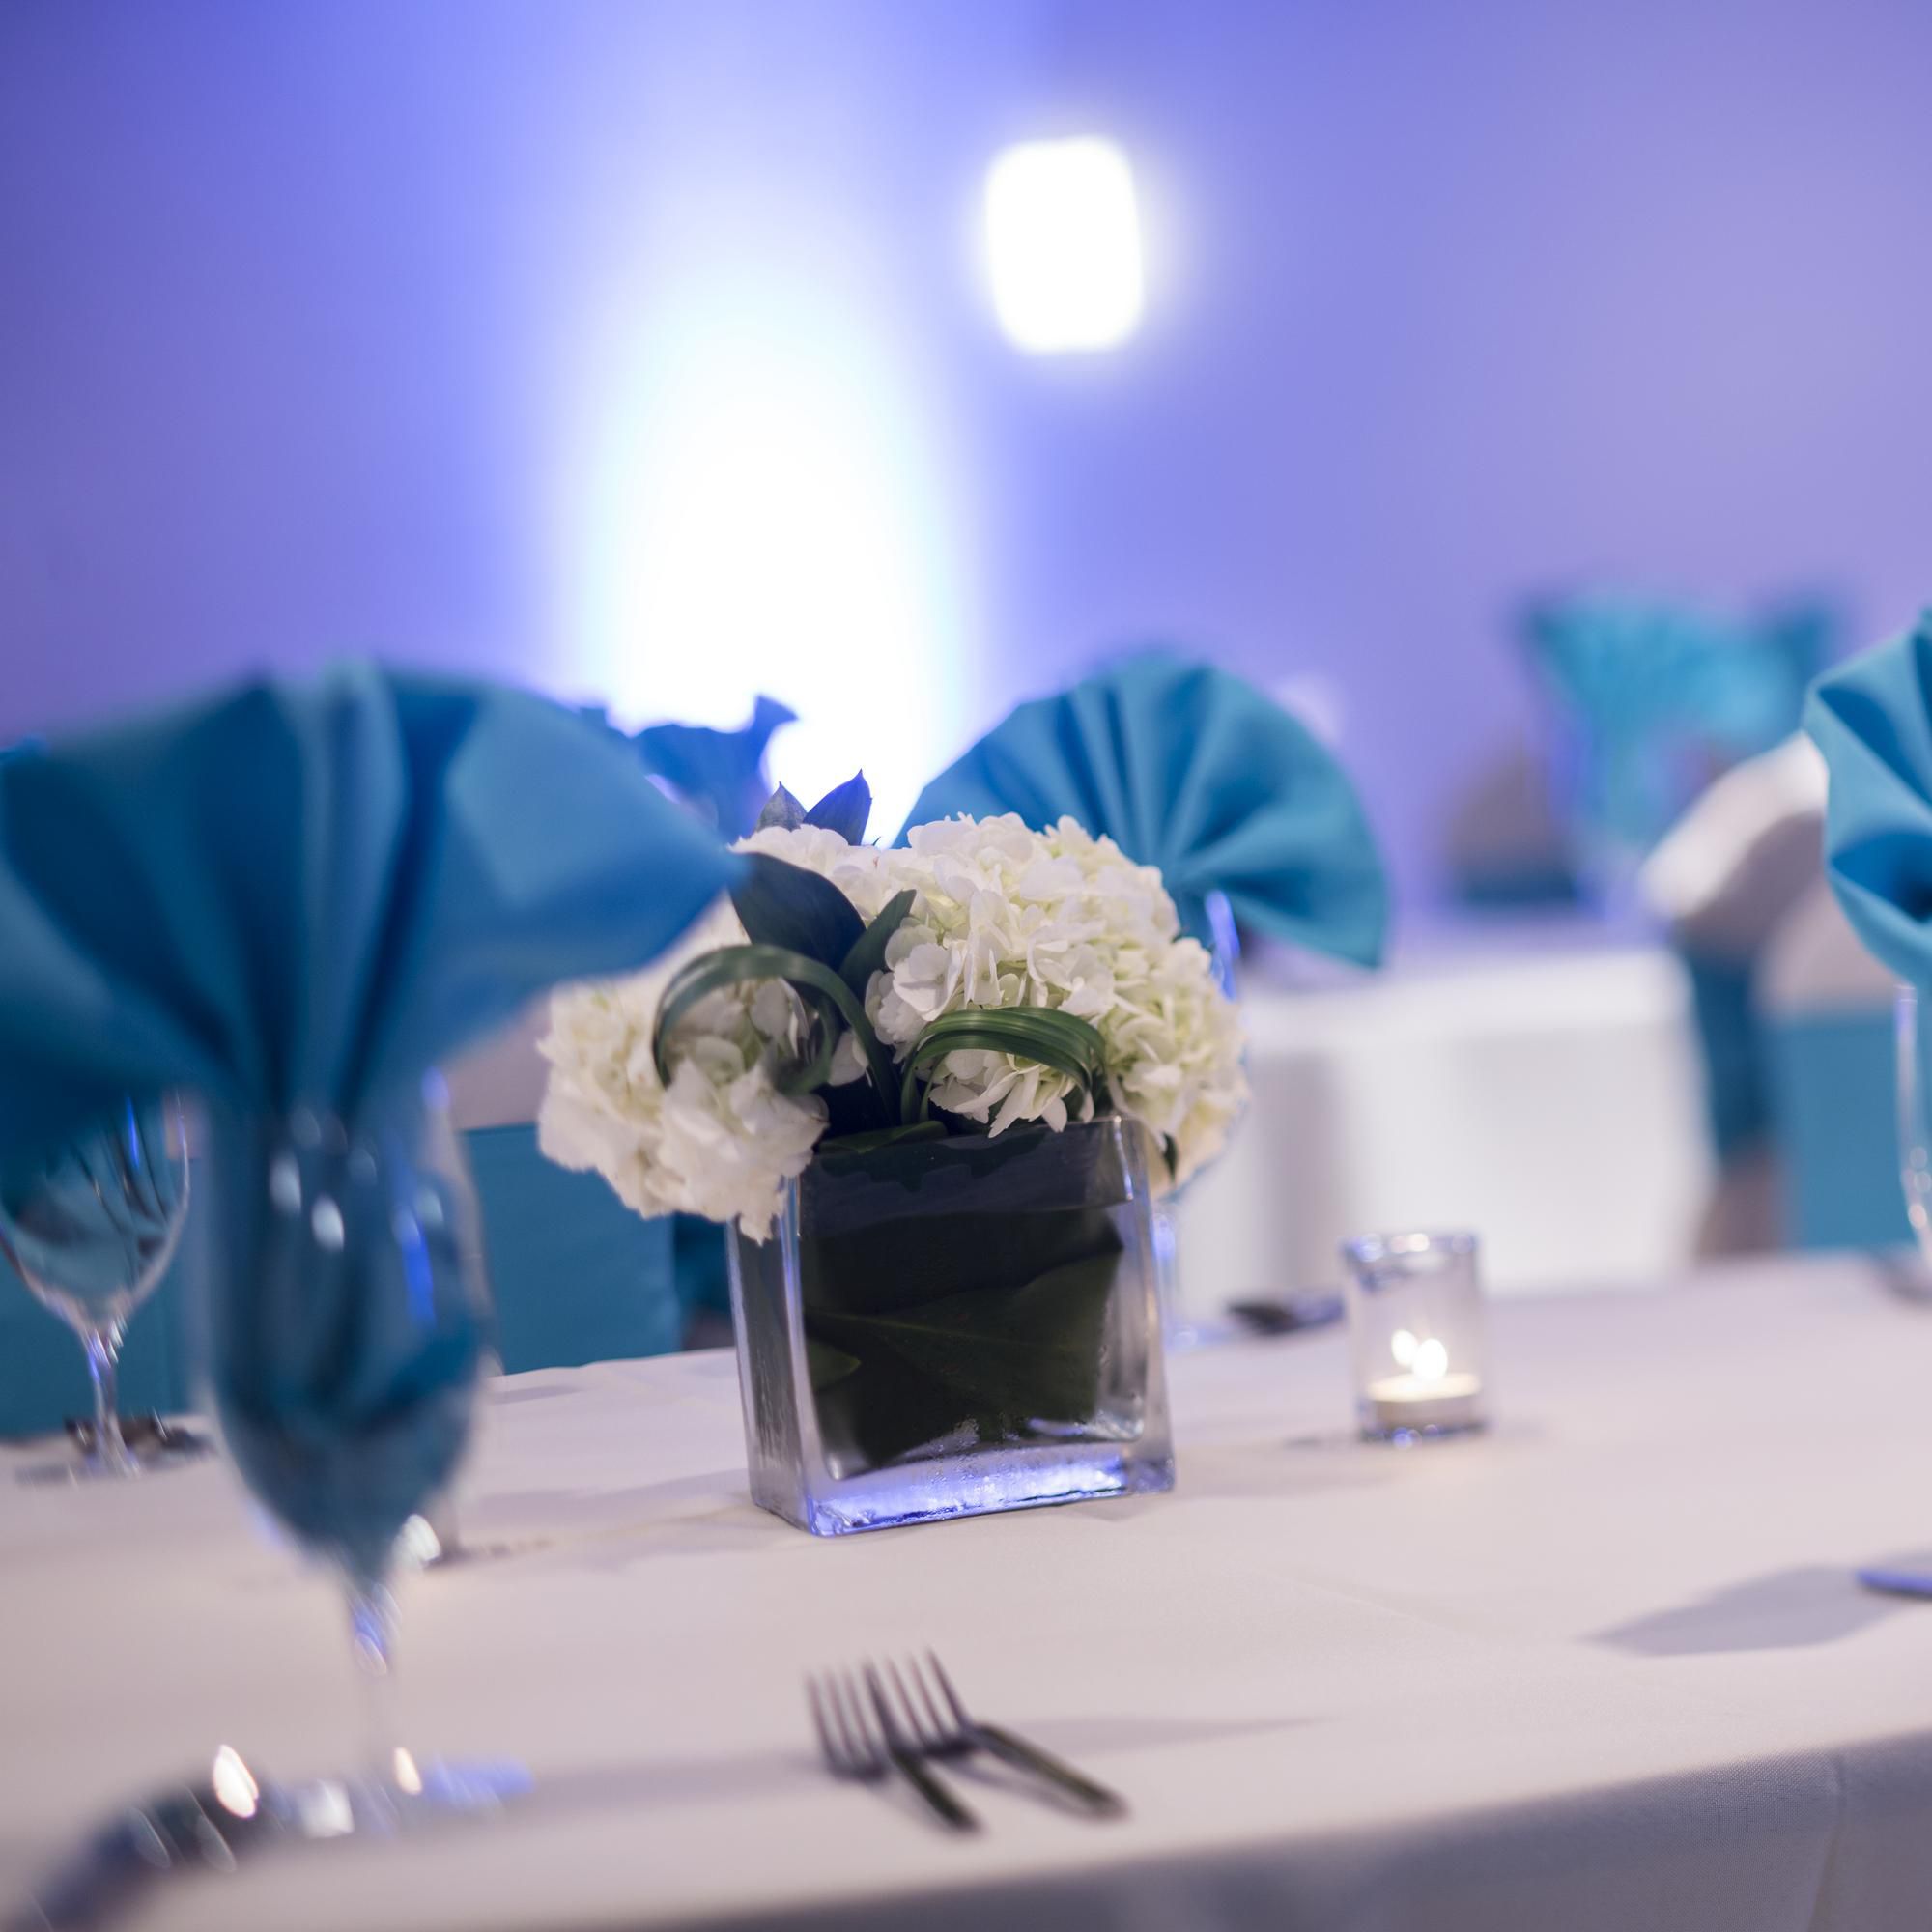 Host your Memphis wedding reception at our downtown hotel